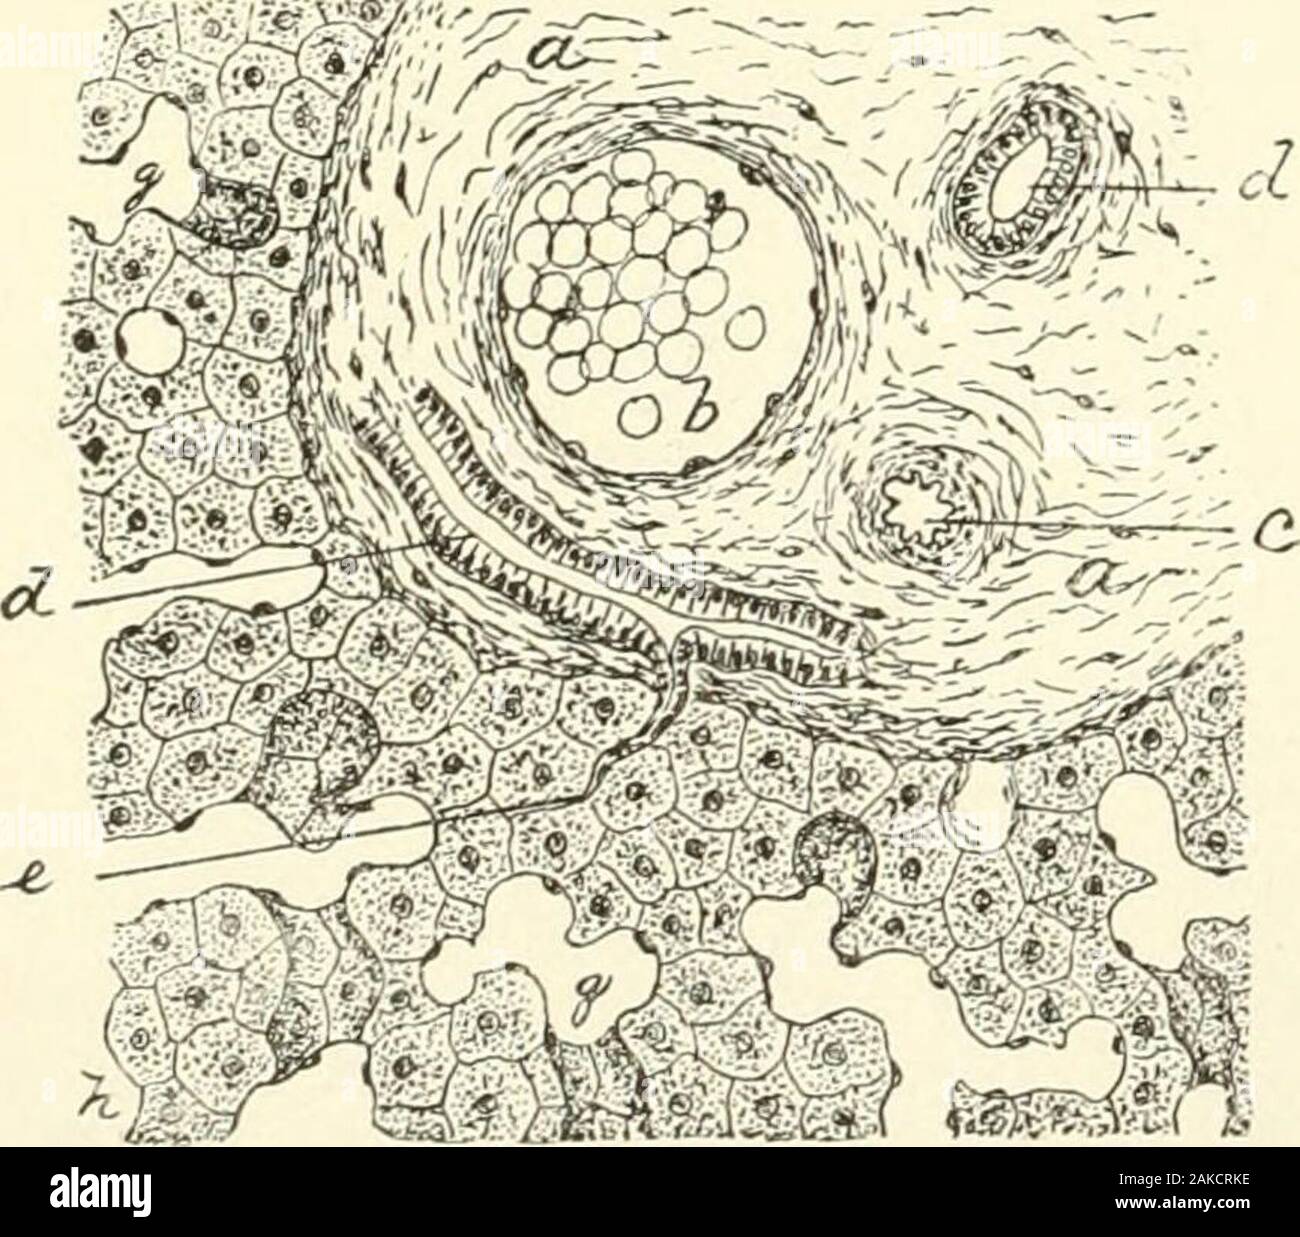 Textbook of normal histology: including an account of the development of the tissues and of the organs . r neces-sity for or probability of theexistence of a membrane tolimit the lumen of the bile-tubule than in the case of other glands. The direct transforma-tion of the secreting hepatic cells into the epithelium of the bile-duct at the margin of theFlG- 225- lobule further opposes the assumption of such limitingmembrane, while examinationof livers in which the tubu-lar type of the acini is re-tained fails to show suchstructures within the luminaof the tubes. Emerging from the lobuleat the pe Stock Photo